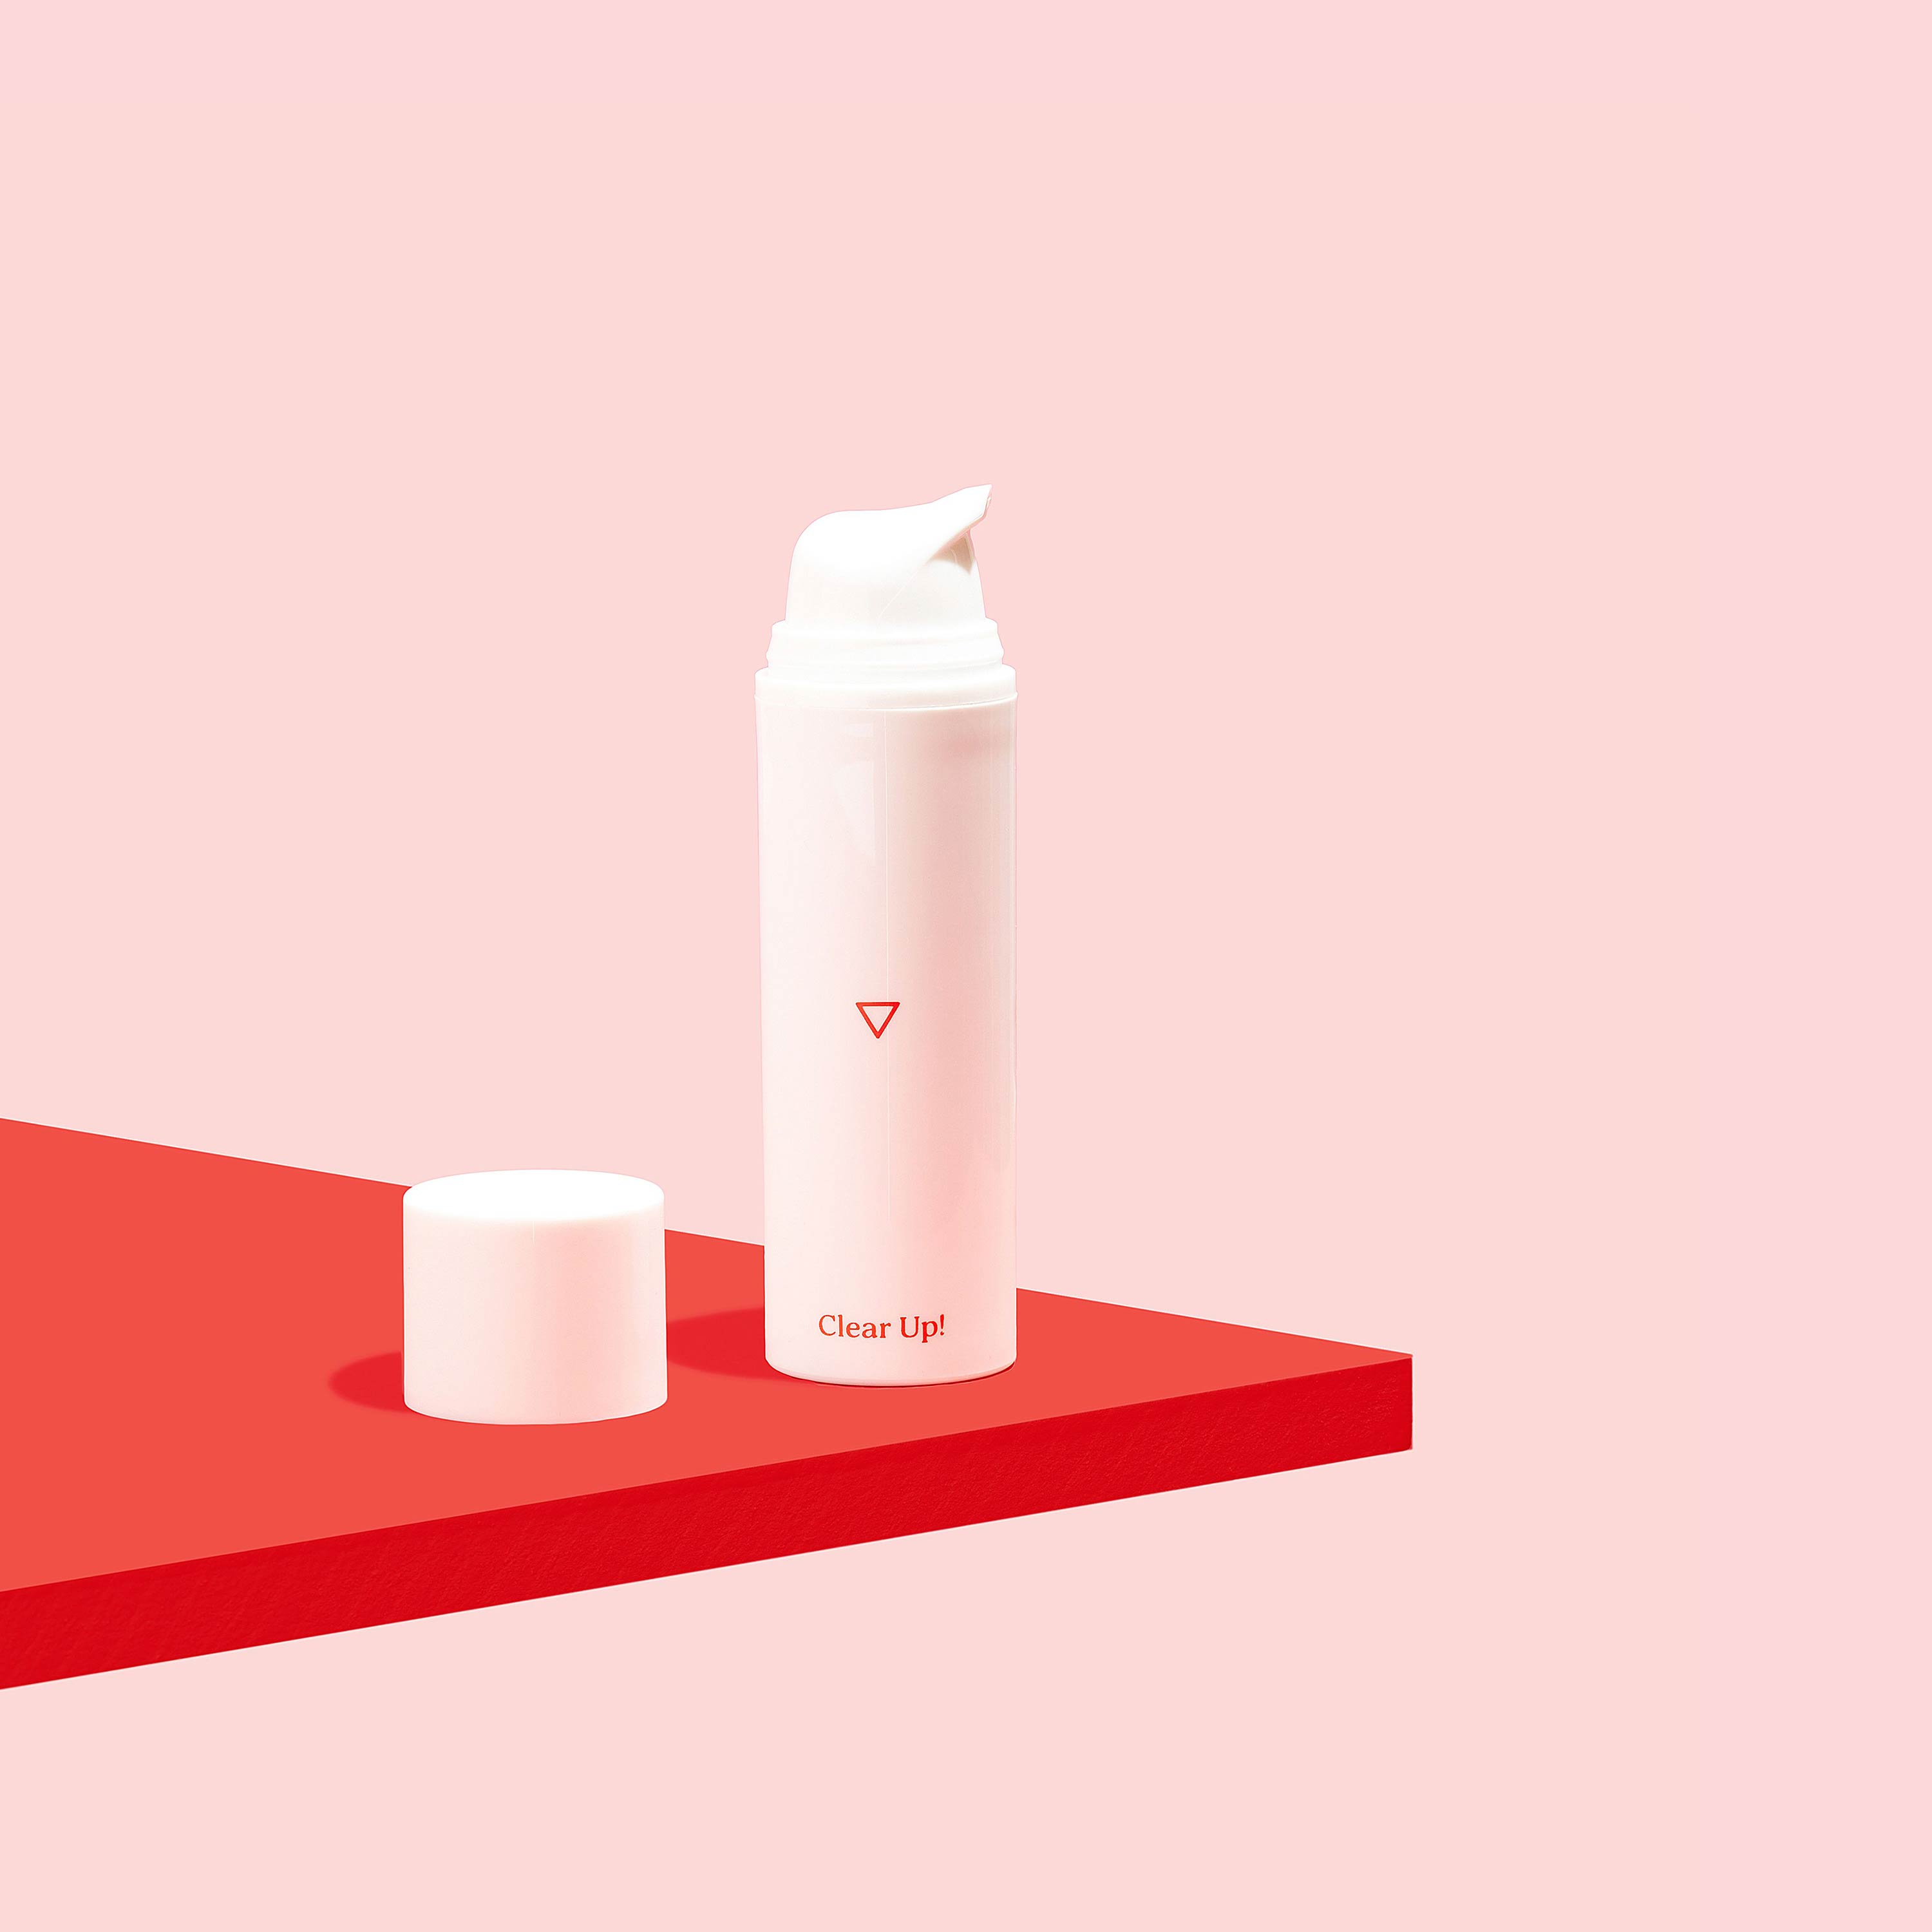 Clear Up! Acne Cream on a red surface, on a pink background